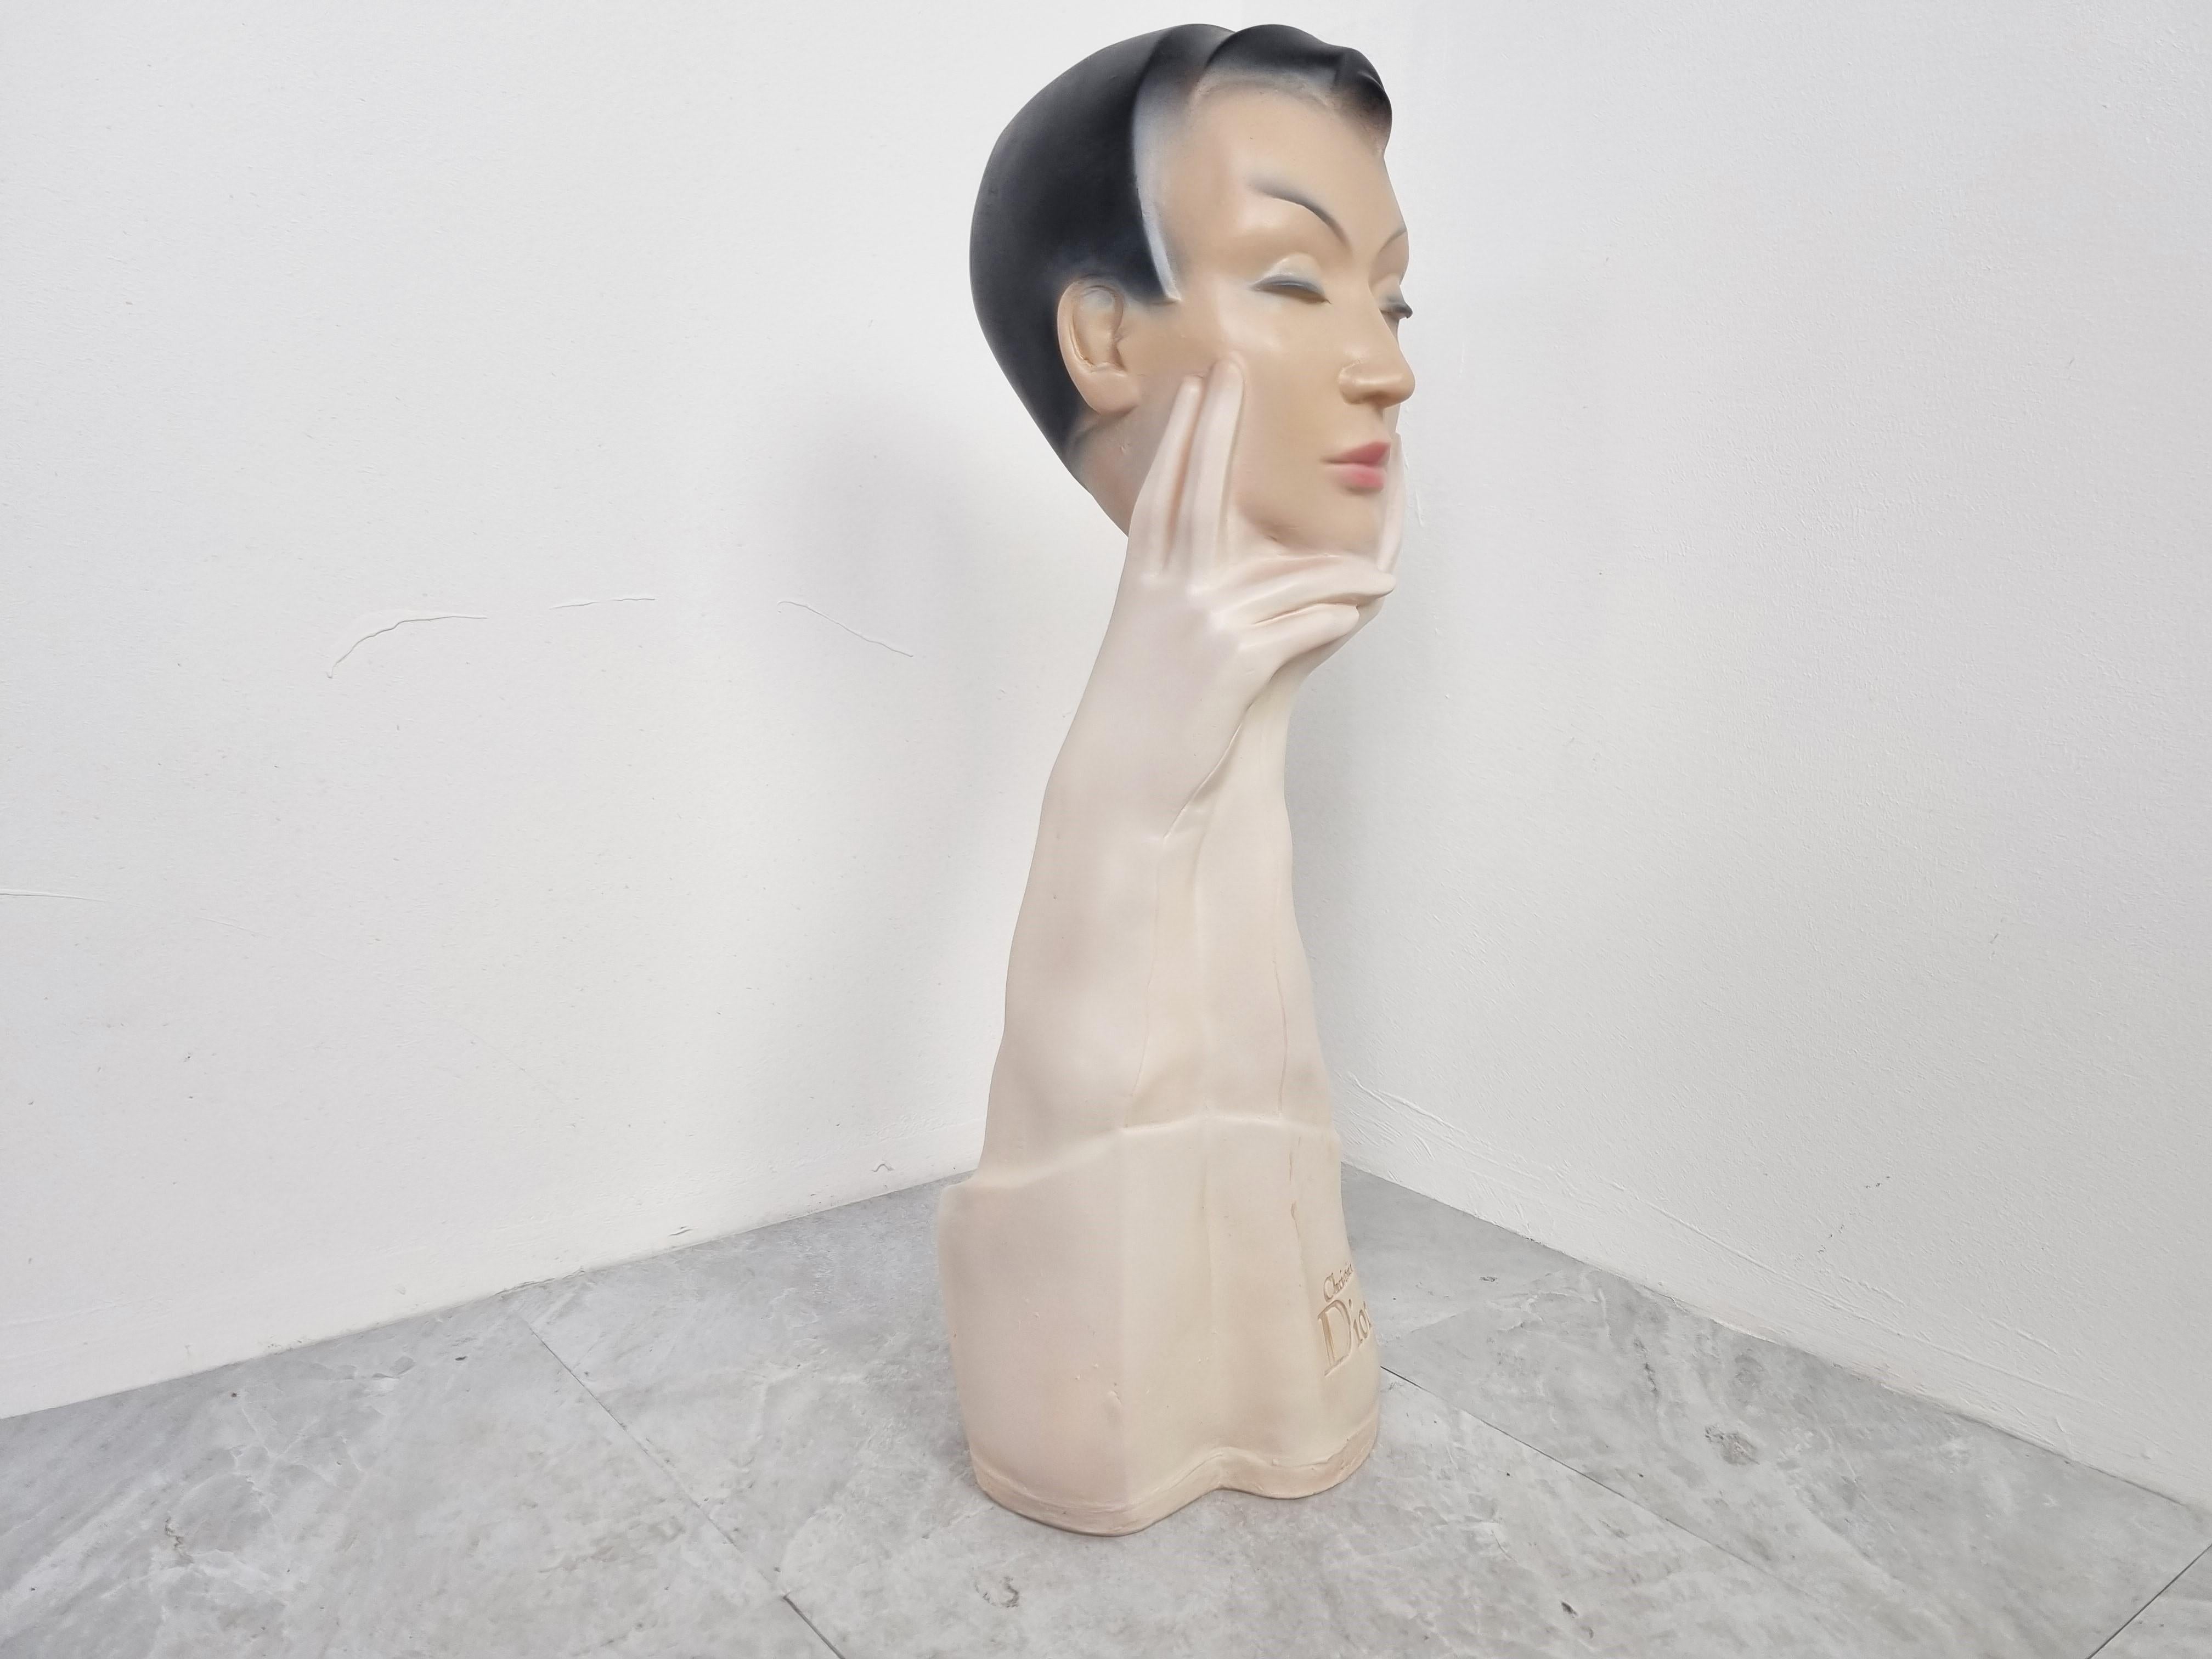 Vintage French Christian Dior Advertising Statue, 1960s For Sale 1